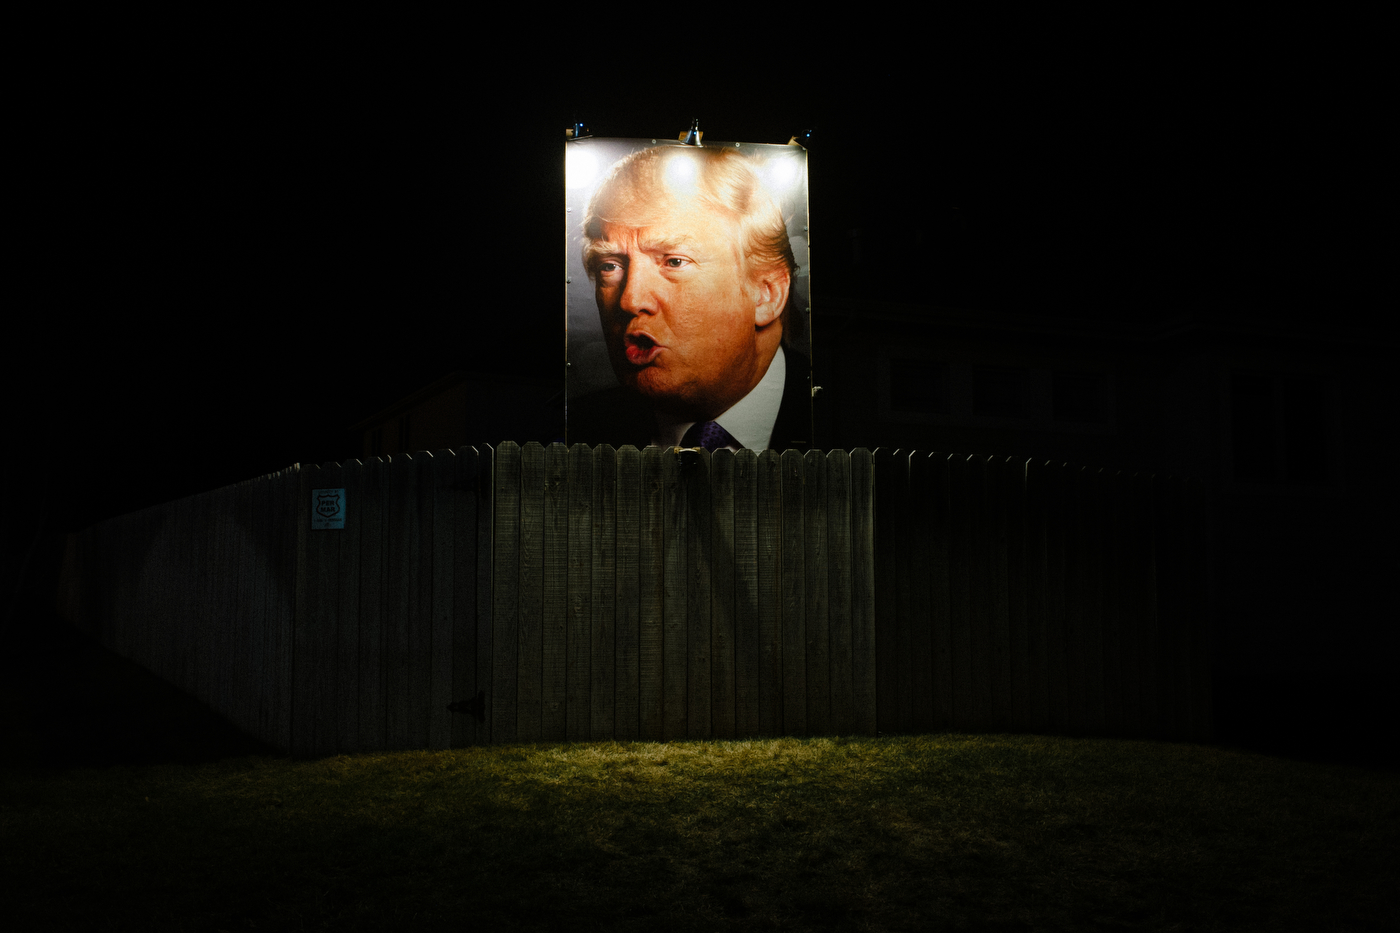  A photo of Republican U.S. presidential candidate Donald Trump stands over the fence at the home of George Davey, a formerly registered independent turned Republican Trump supporter. Davey puts up signage every election at his home off Jordan Creek 